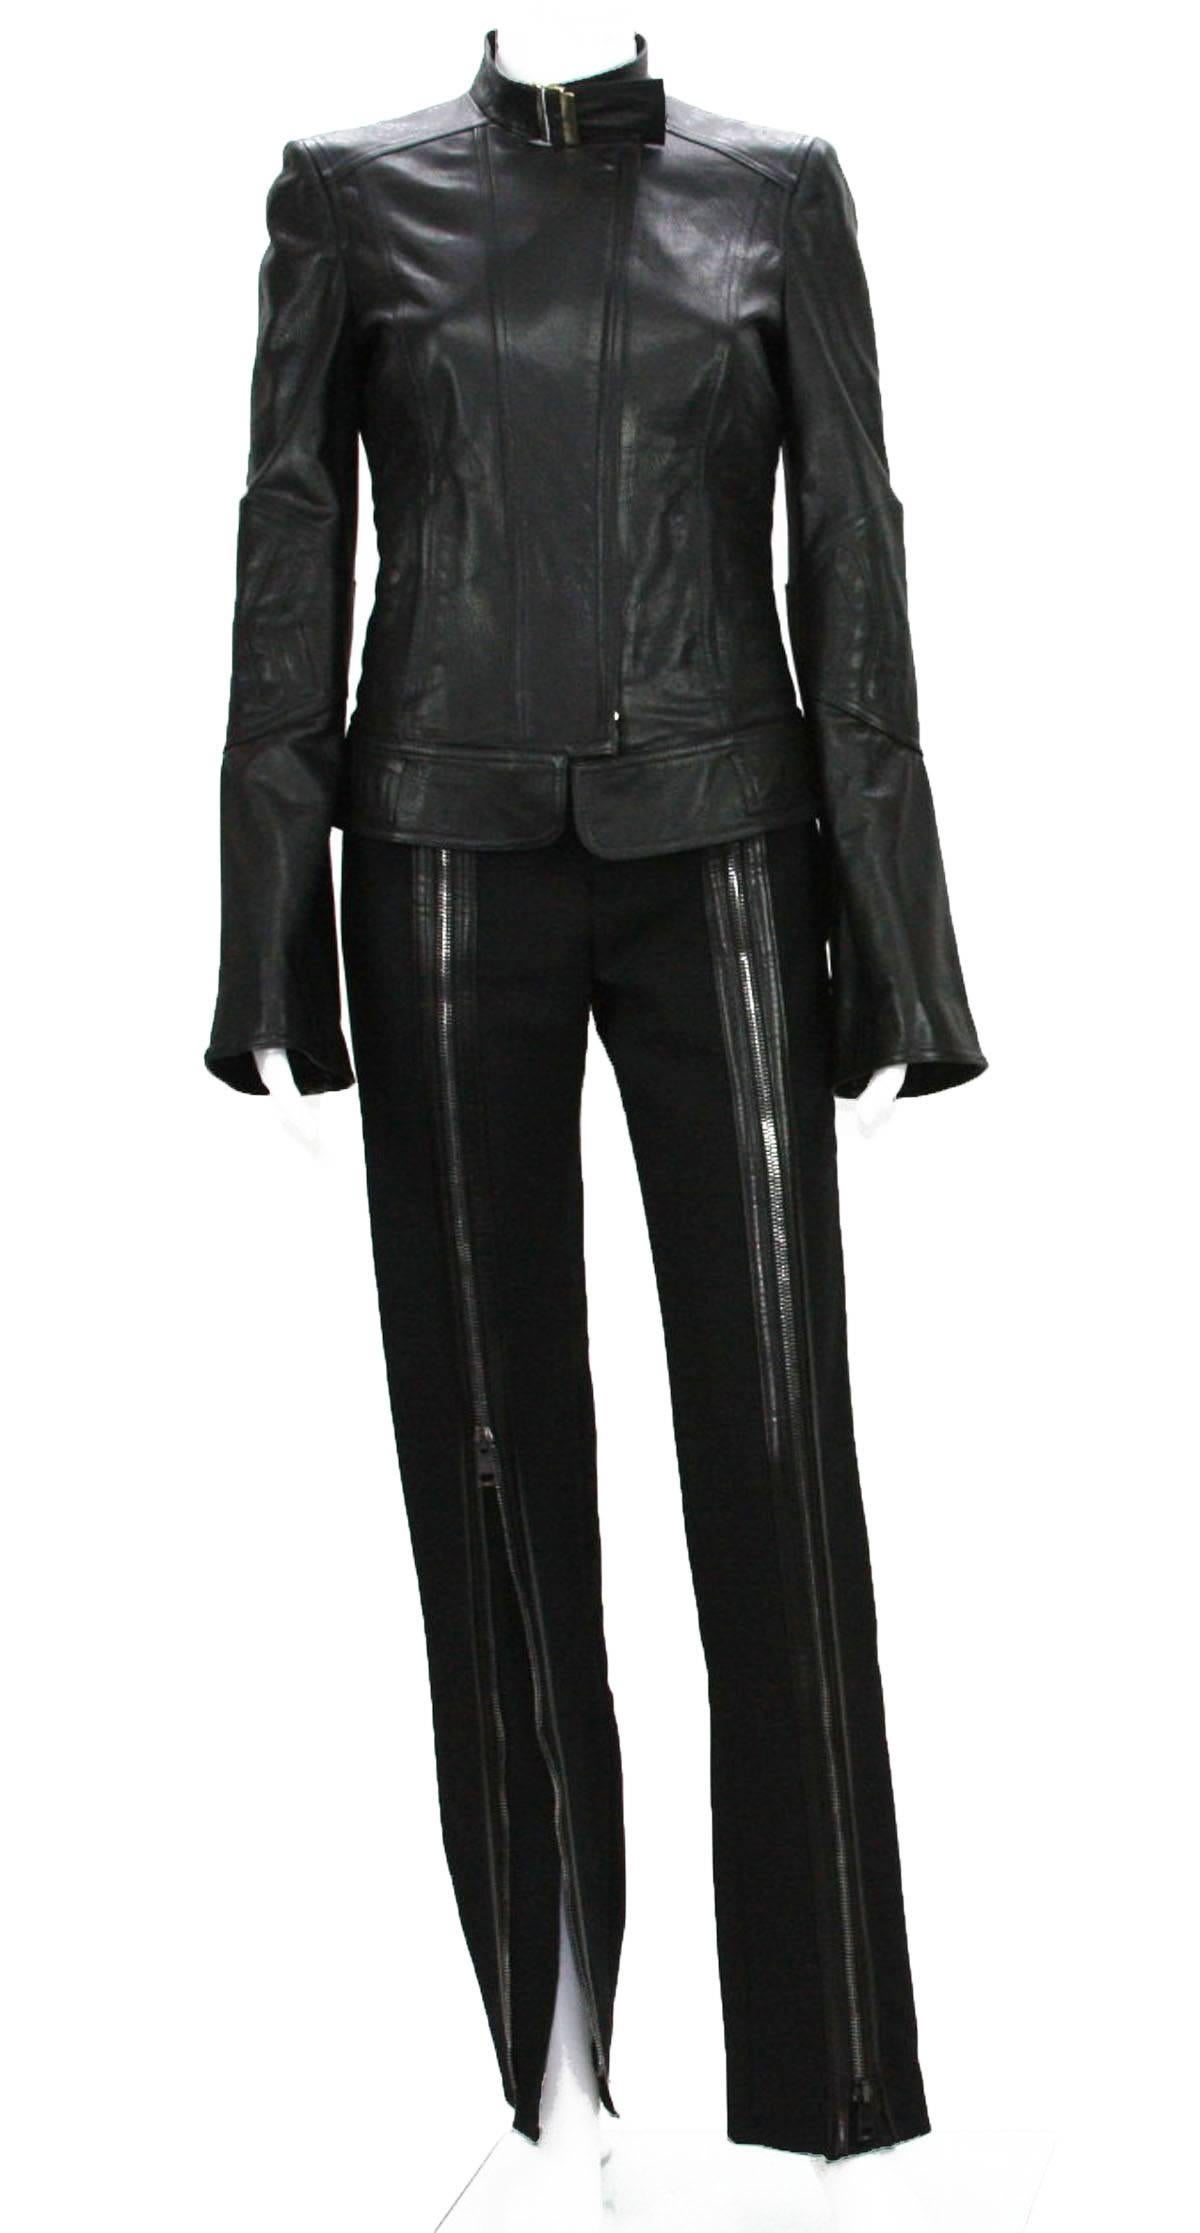 TOM FORD for GUCCI 2004 Collection Leather Chevron Black Jacket It. 40 - US 4 For Sale 2